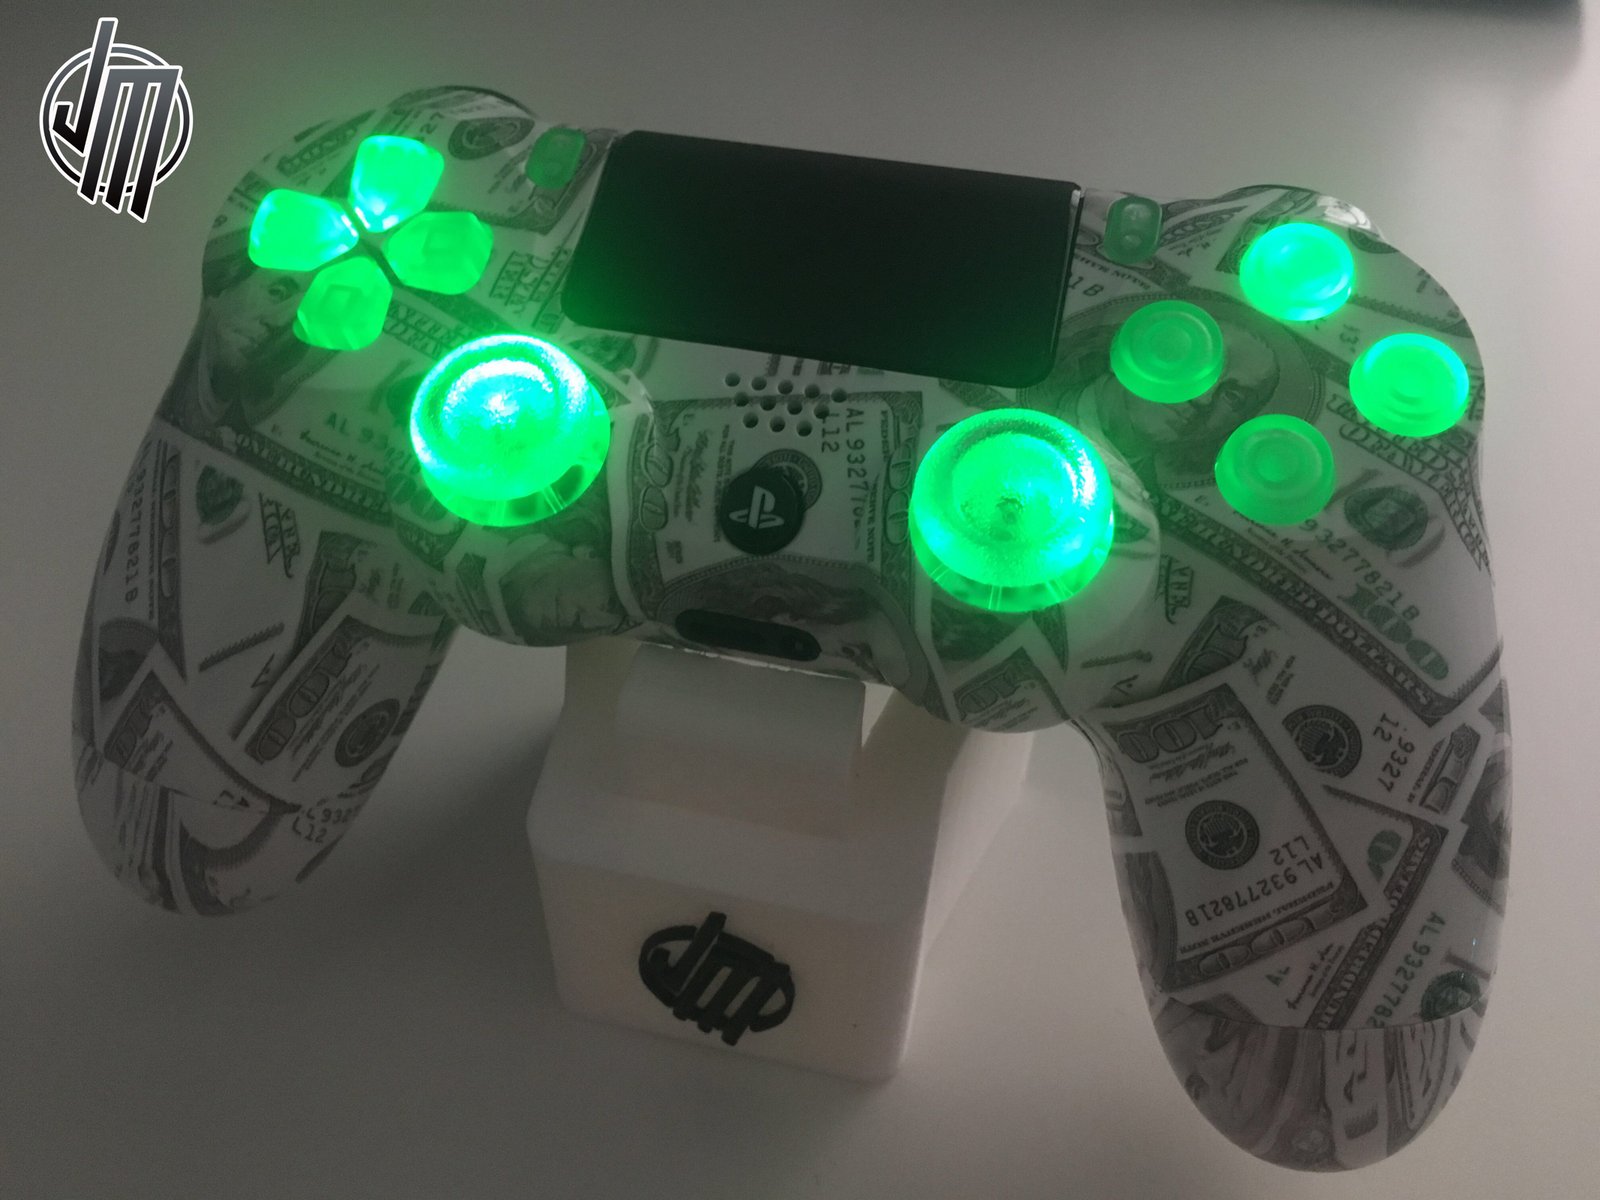 led ps4 controller